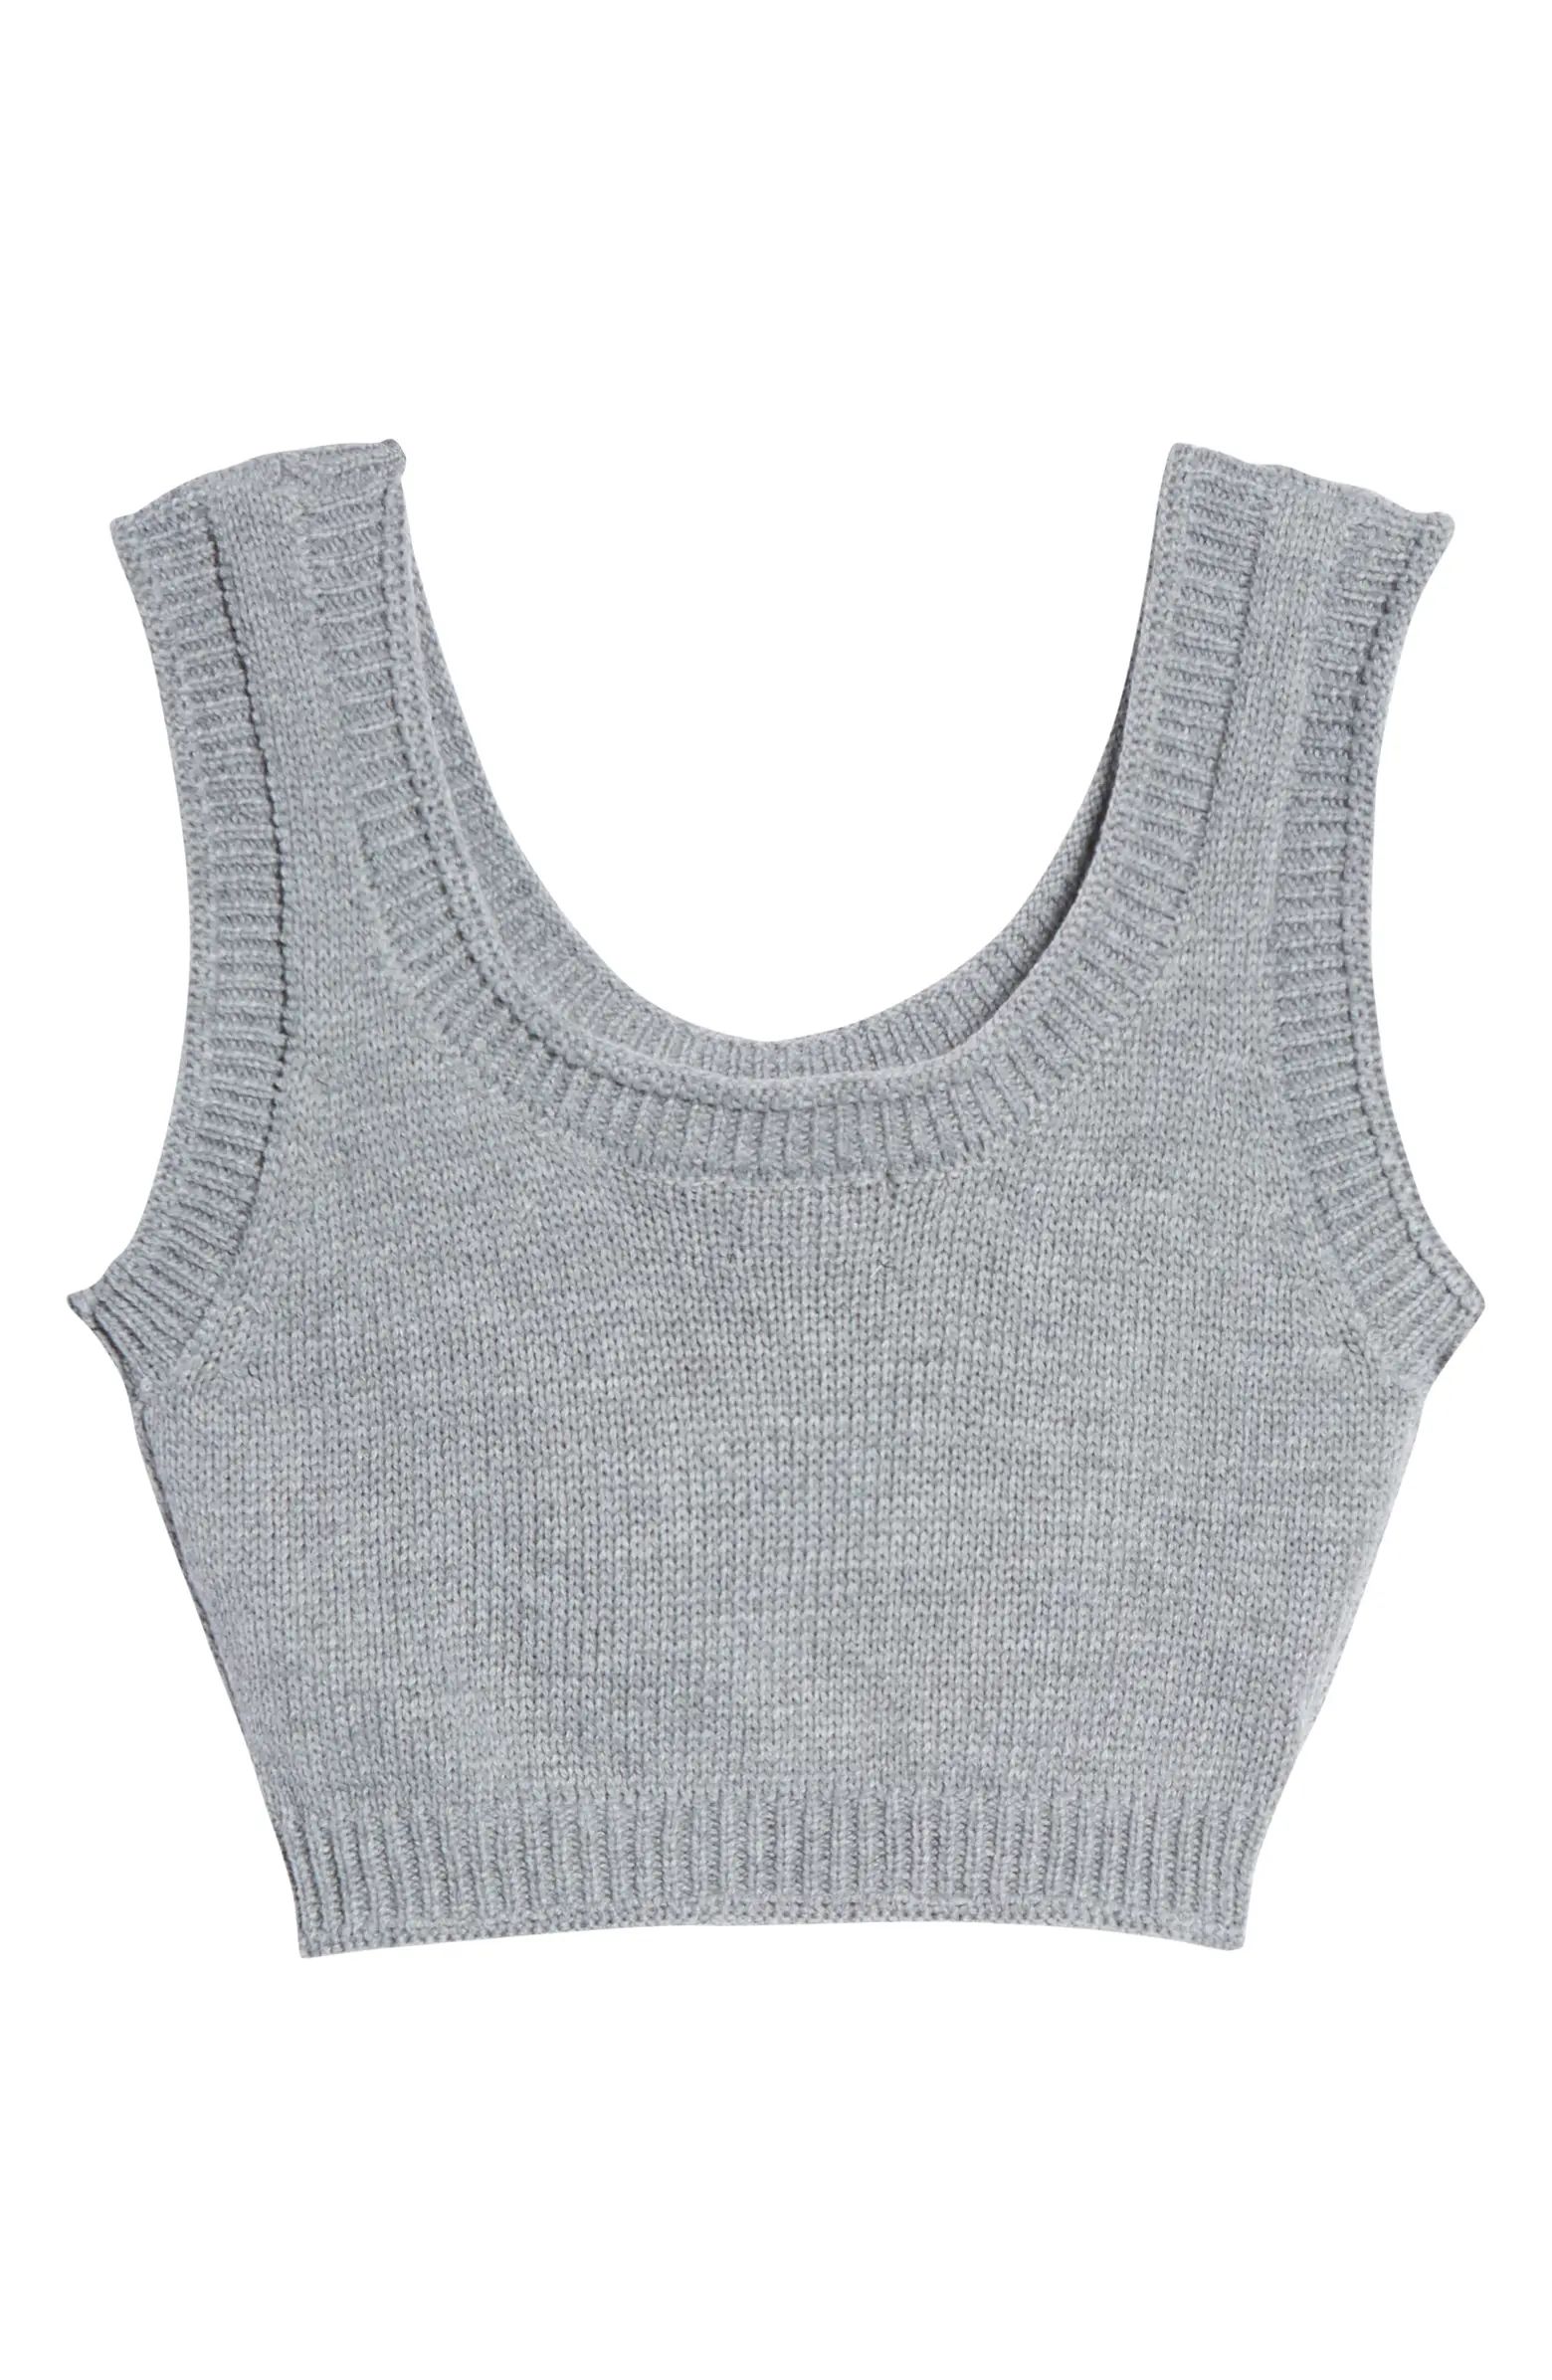 VICI Collection Crop Sweater Tank | Nordstrom | Nordstrom